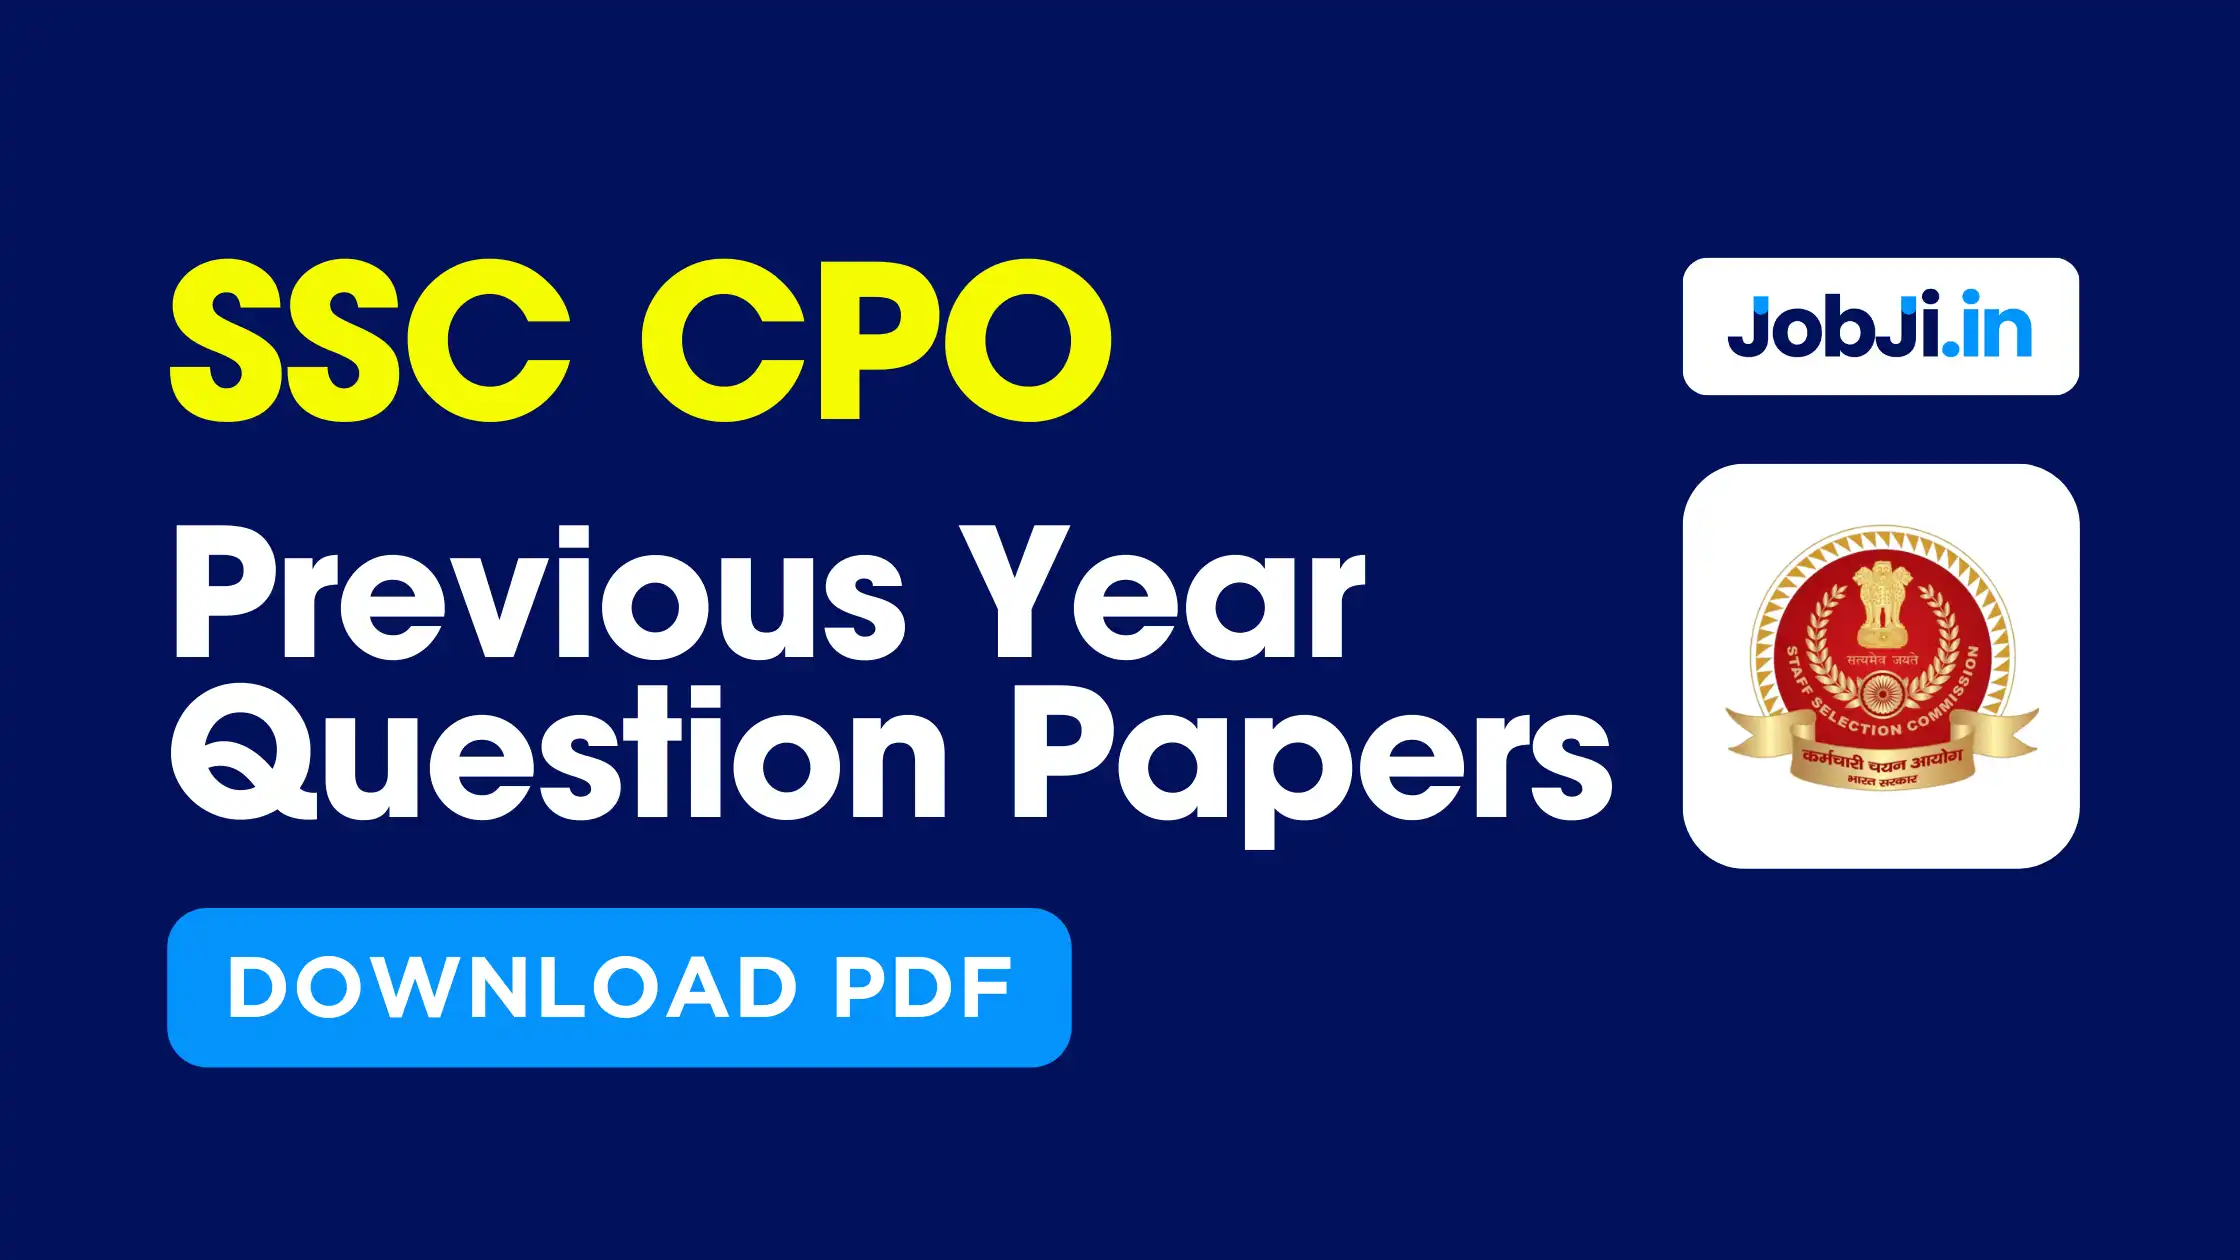 SSC CPO previous year question papers